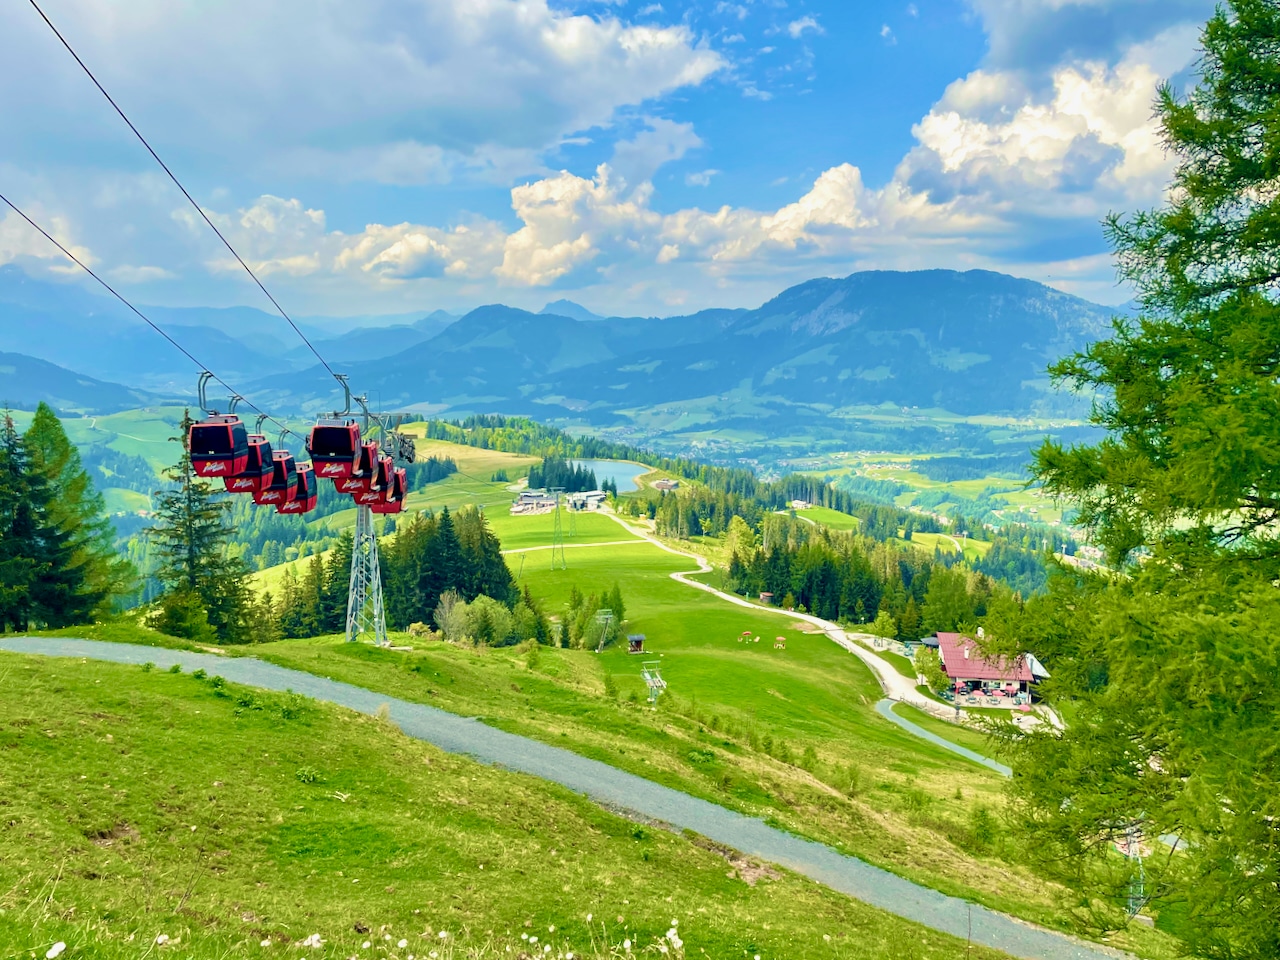 That was probably the gondola ride that we did most often on vacation: I would like to tell you about my personal experience with the mountain railways in Fieberbrunn - from the visits to Streuboden to the Lärchfilzkogel. Bergbahnen Fieberbrunn Bergbahnen Fieberbrunn & PillerseeTal – my experience report